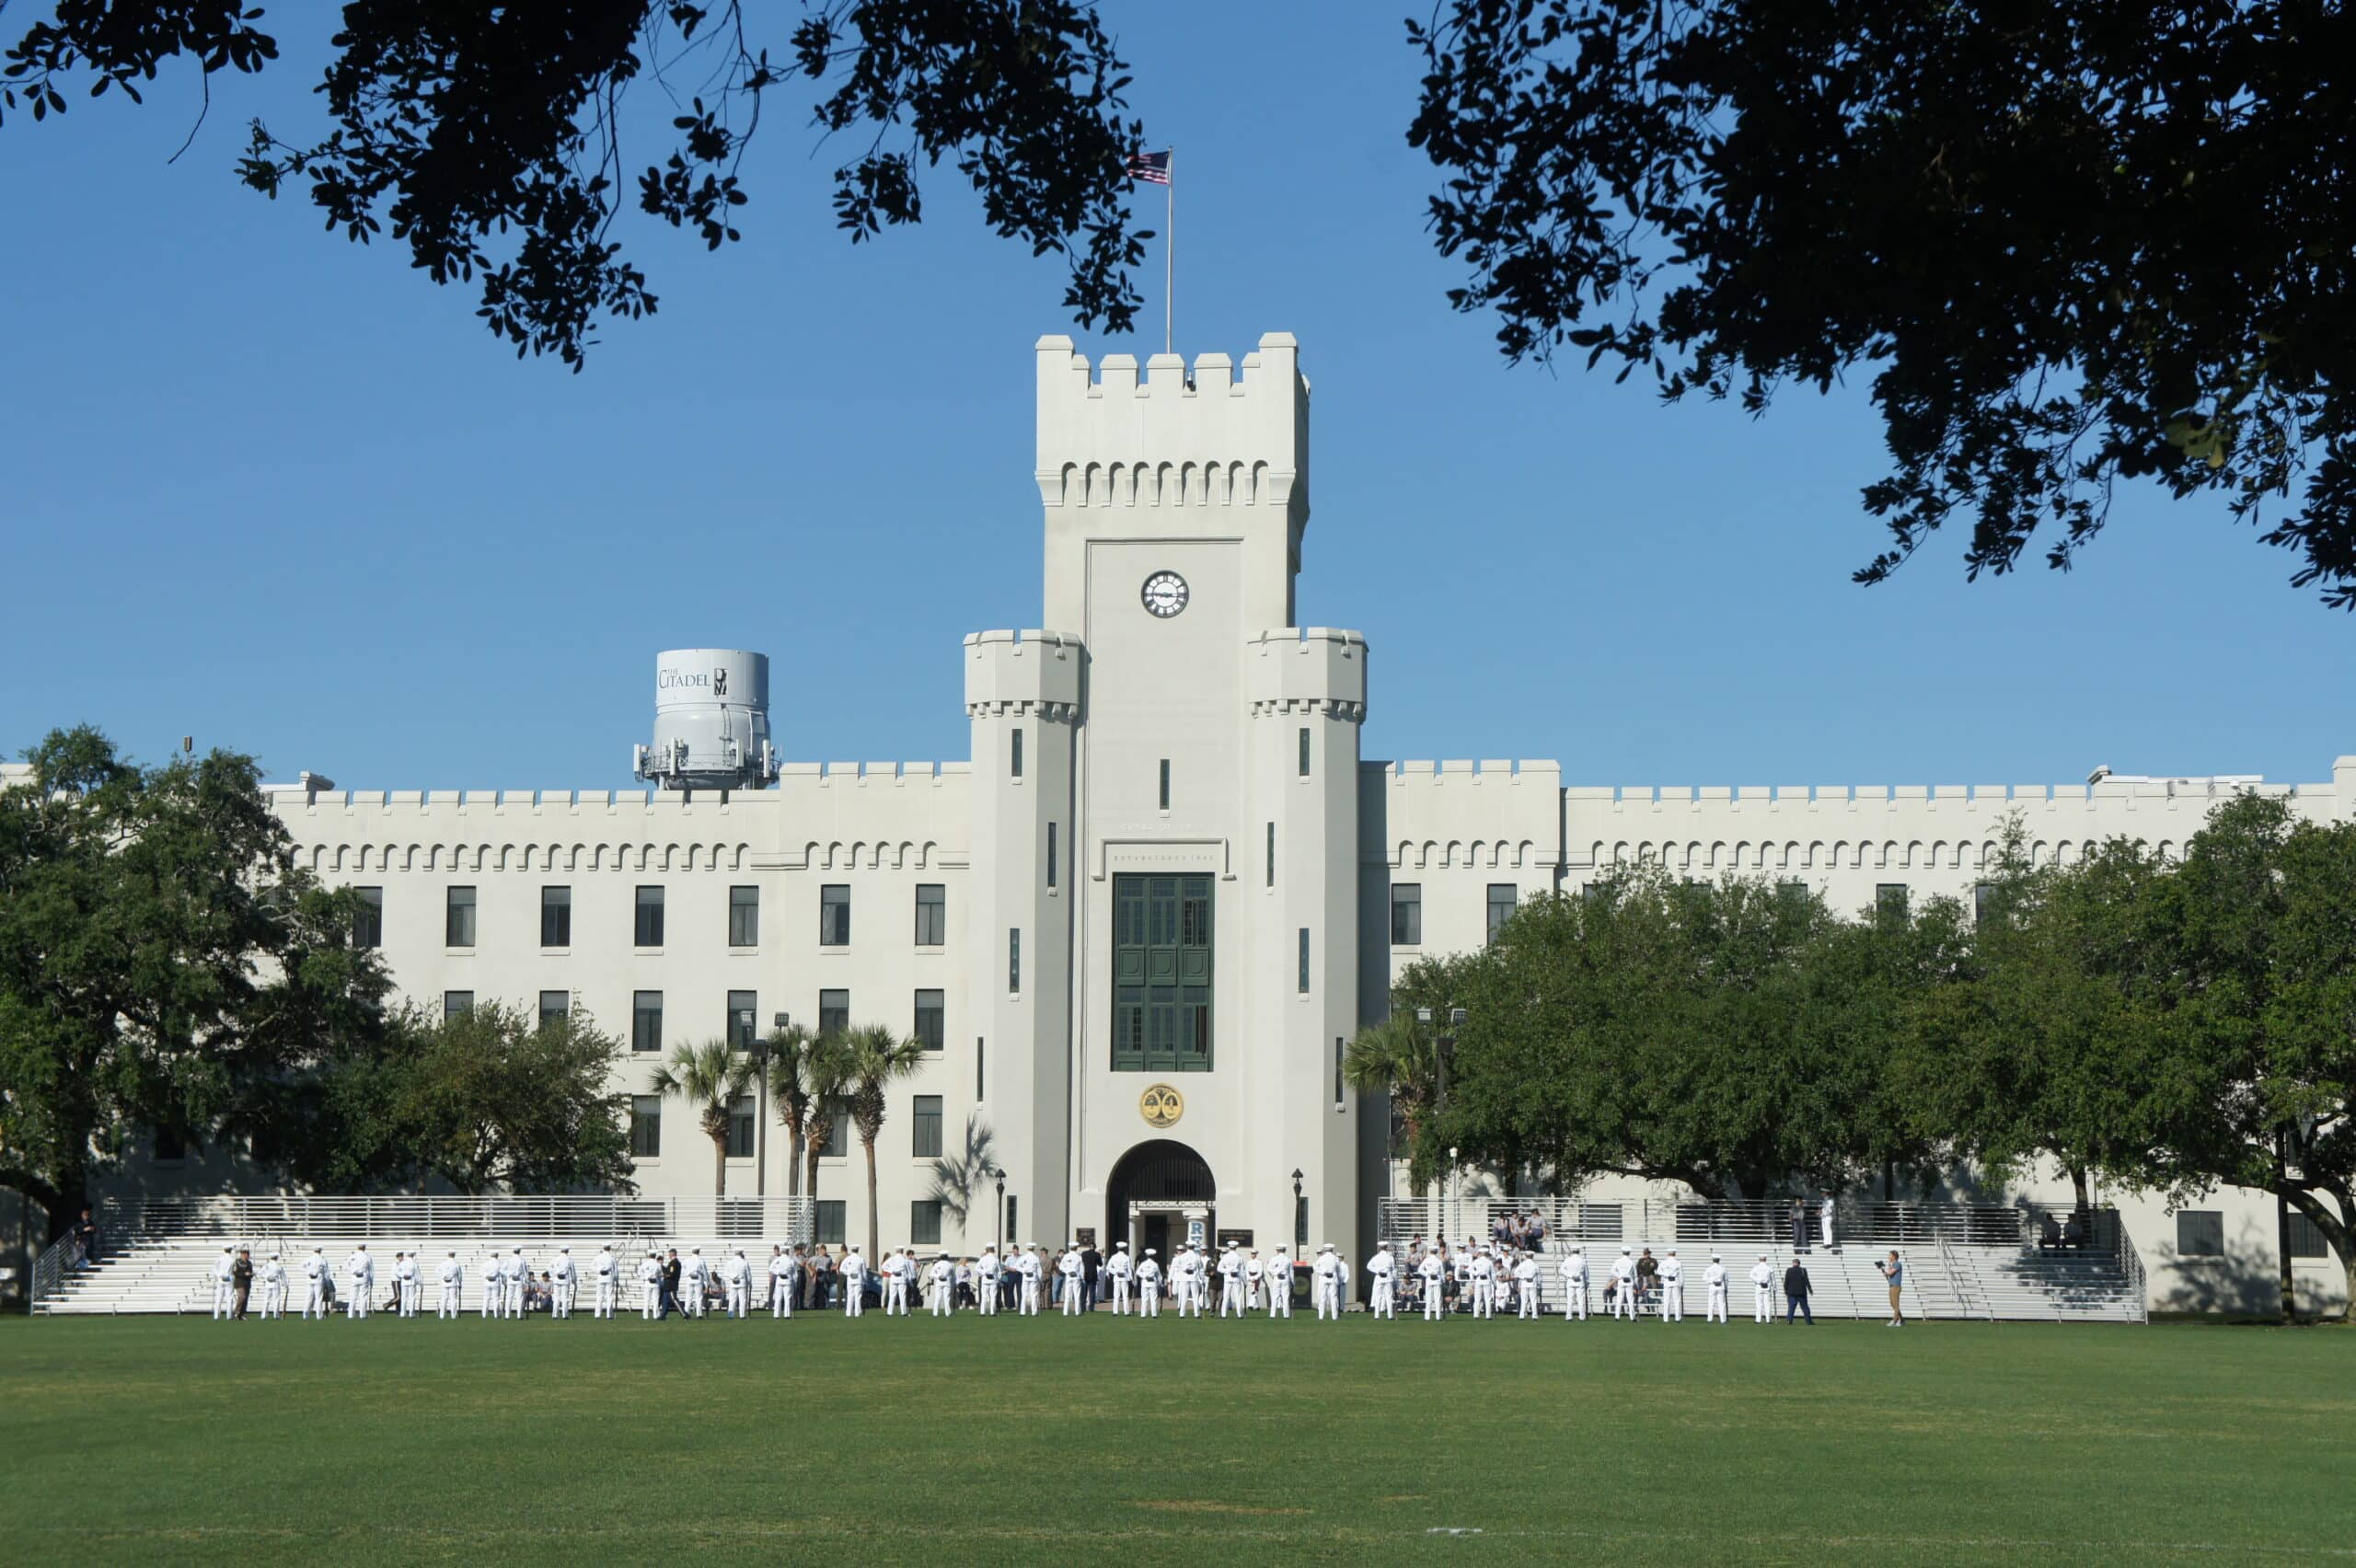 Practice at the Citadel